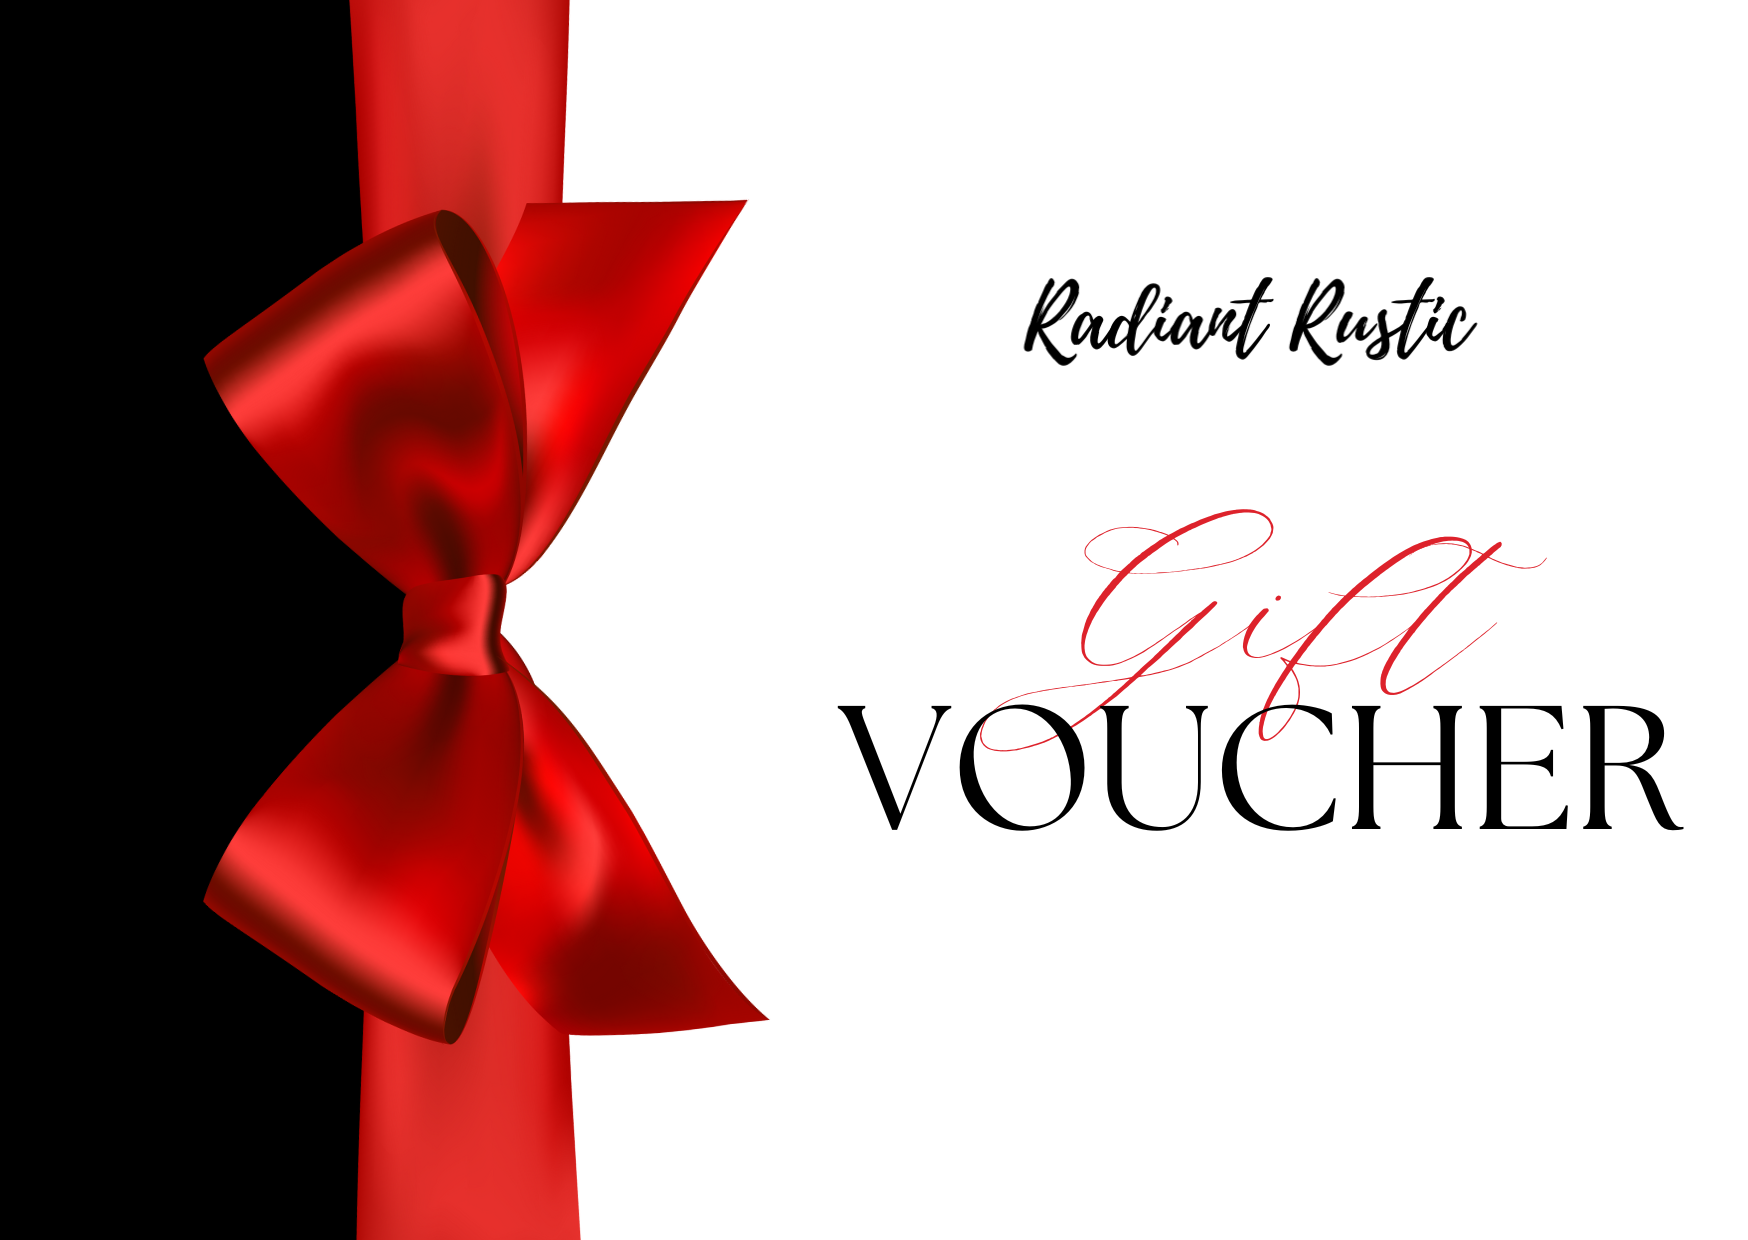 Radiant Rustic Gift Card